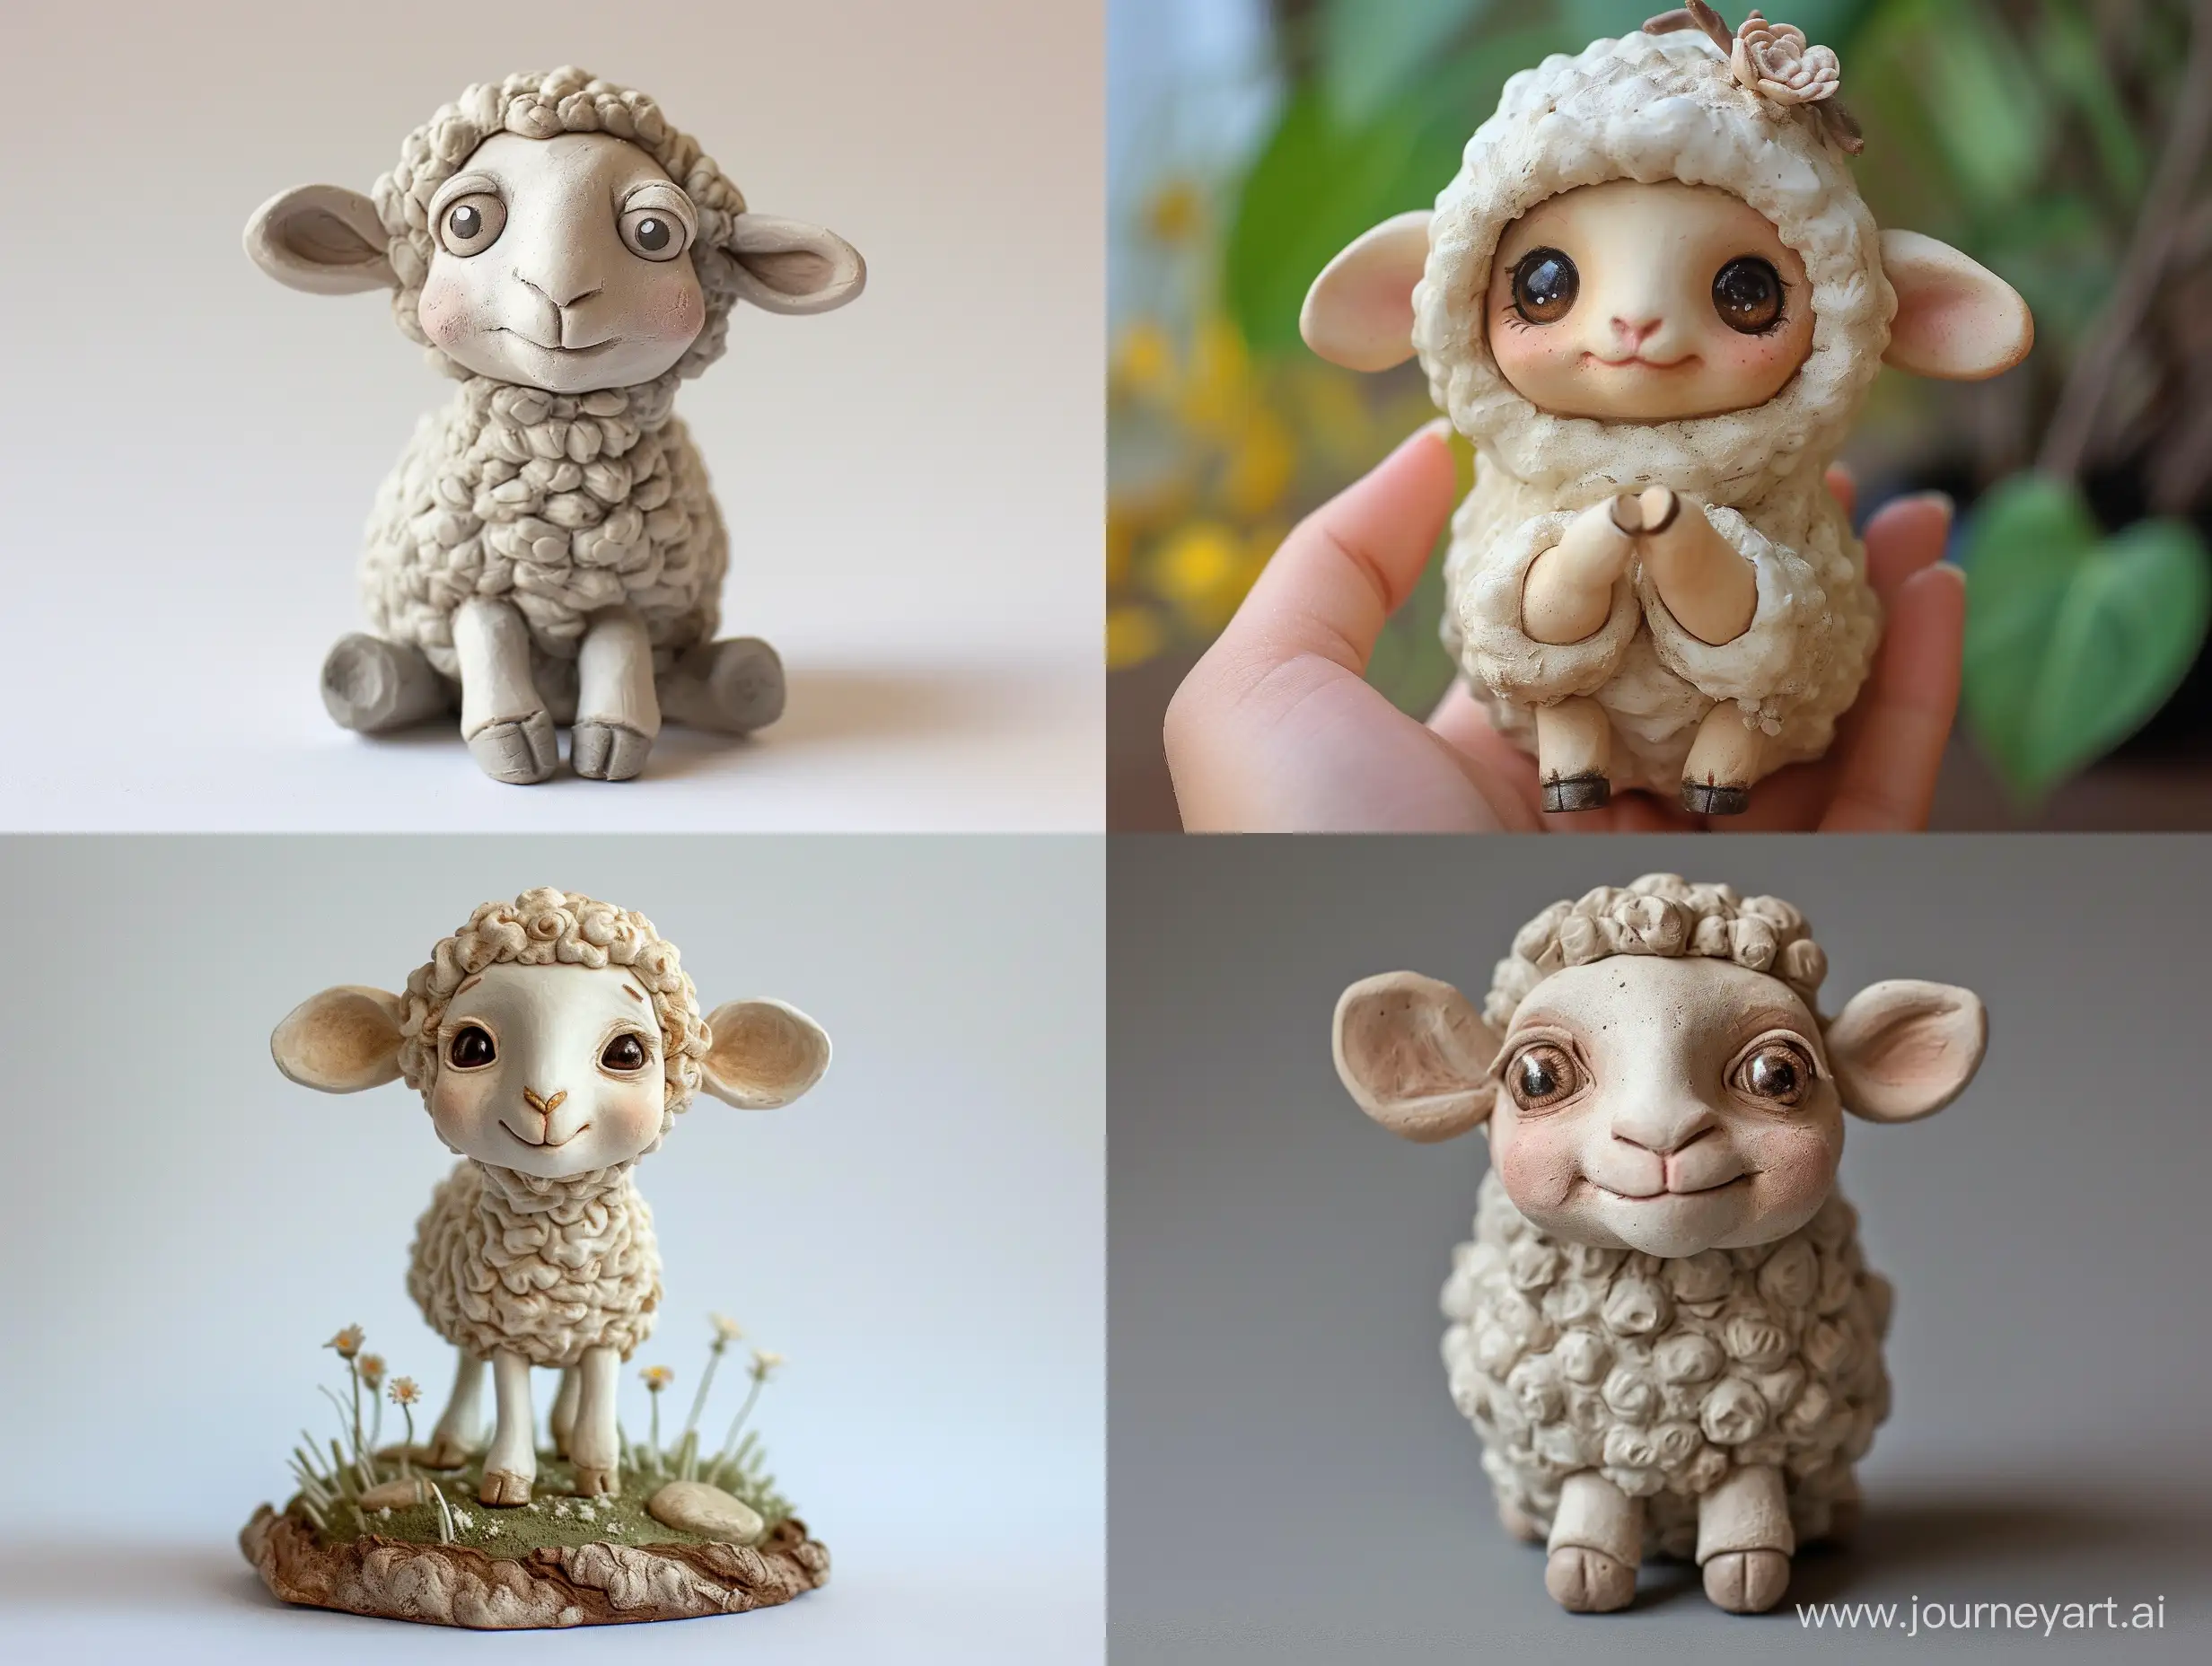 Handcrafted-Clay-Statuette-of-a-Cute-Nonexistent-FairyTale-Lamb